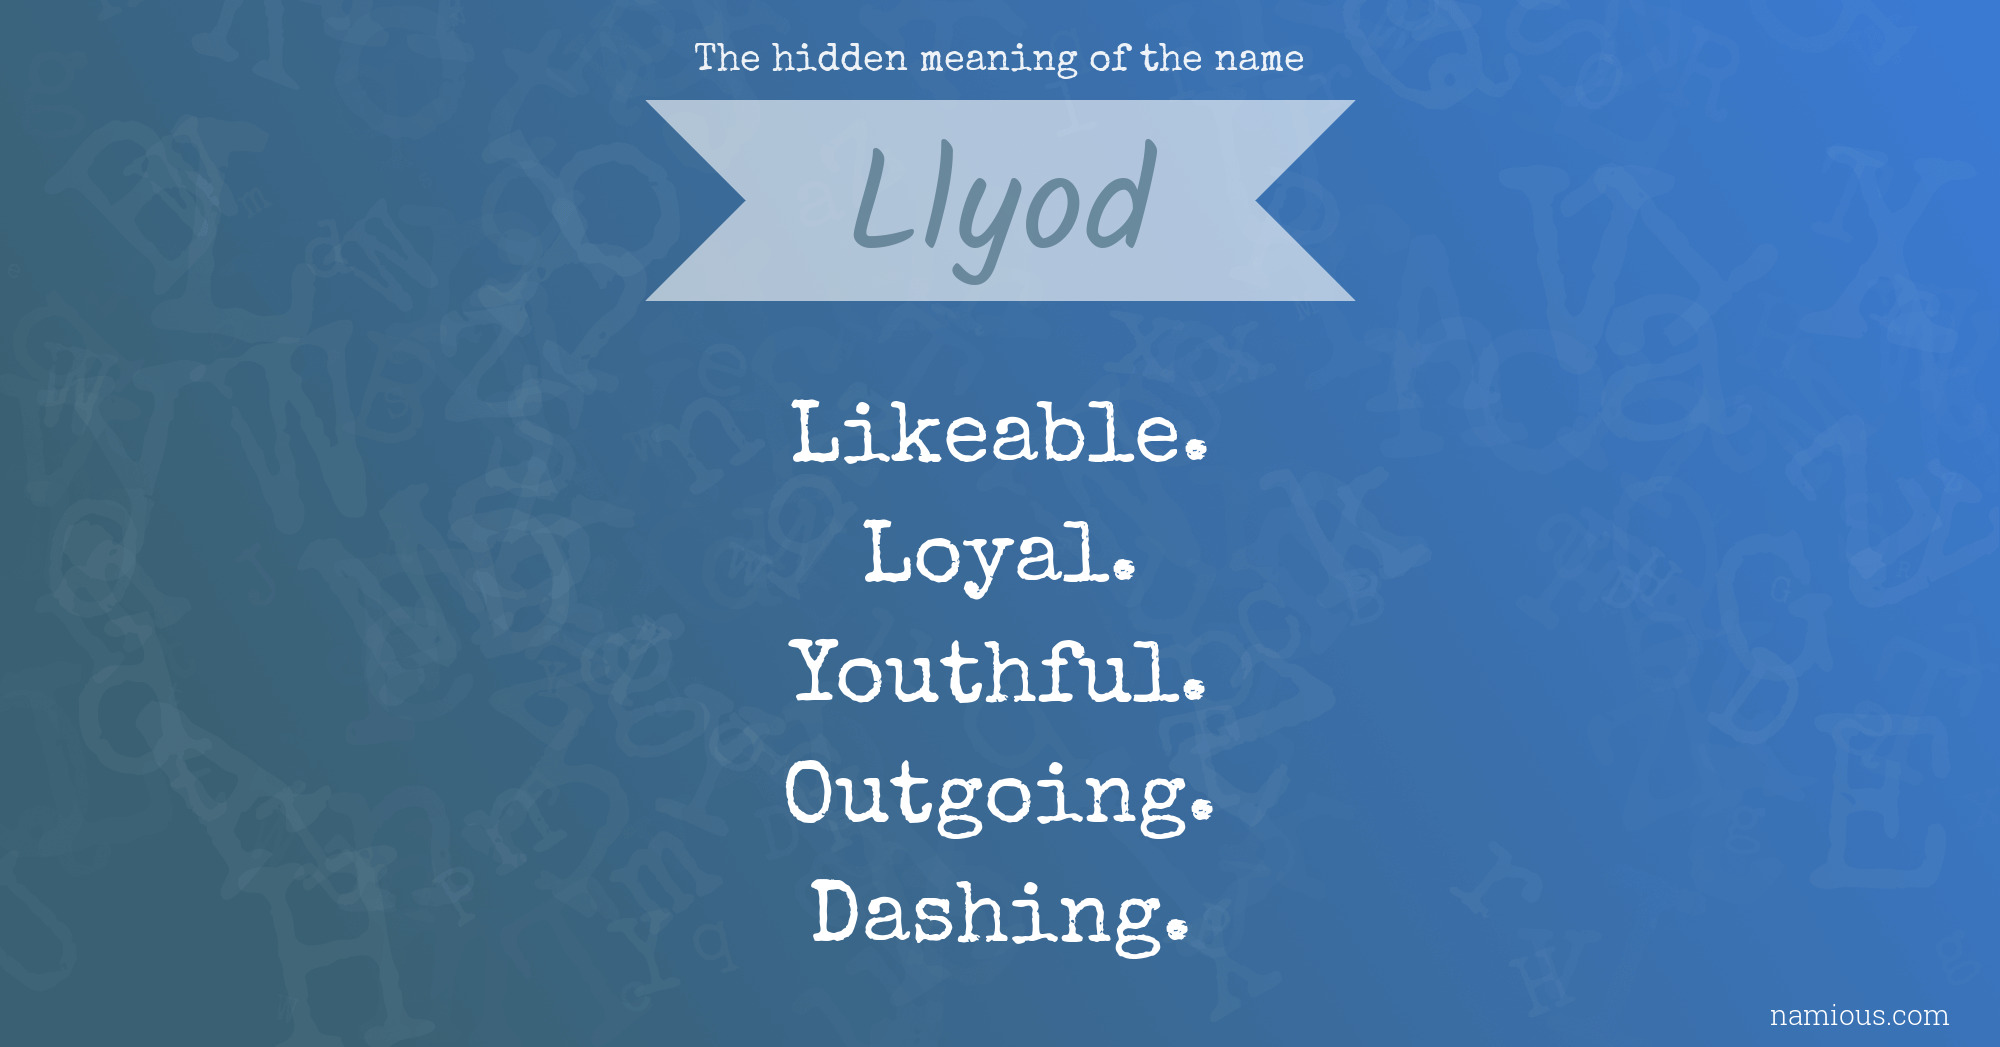 The hidden meaning of the name Llyod